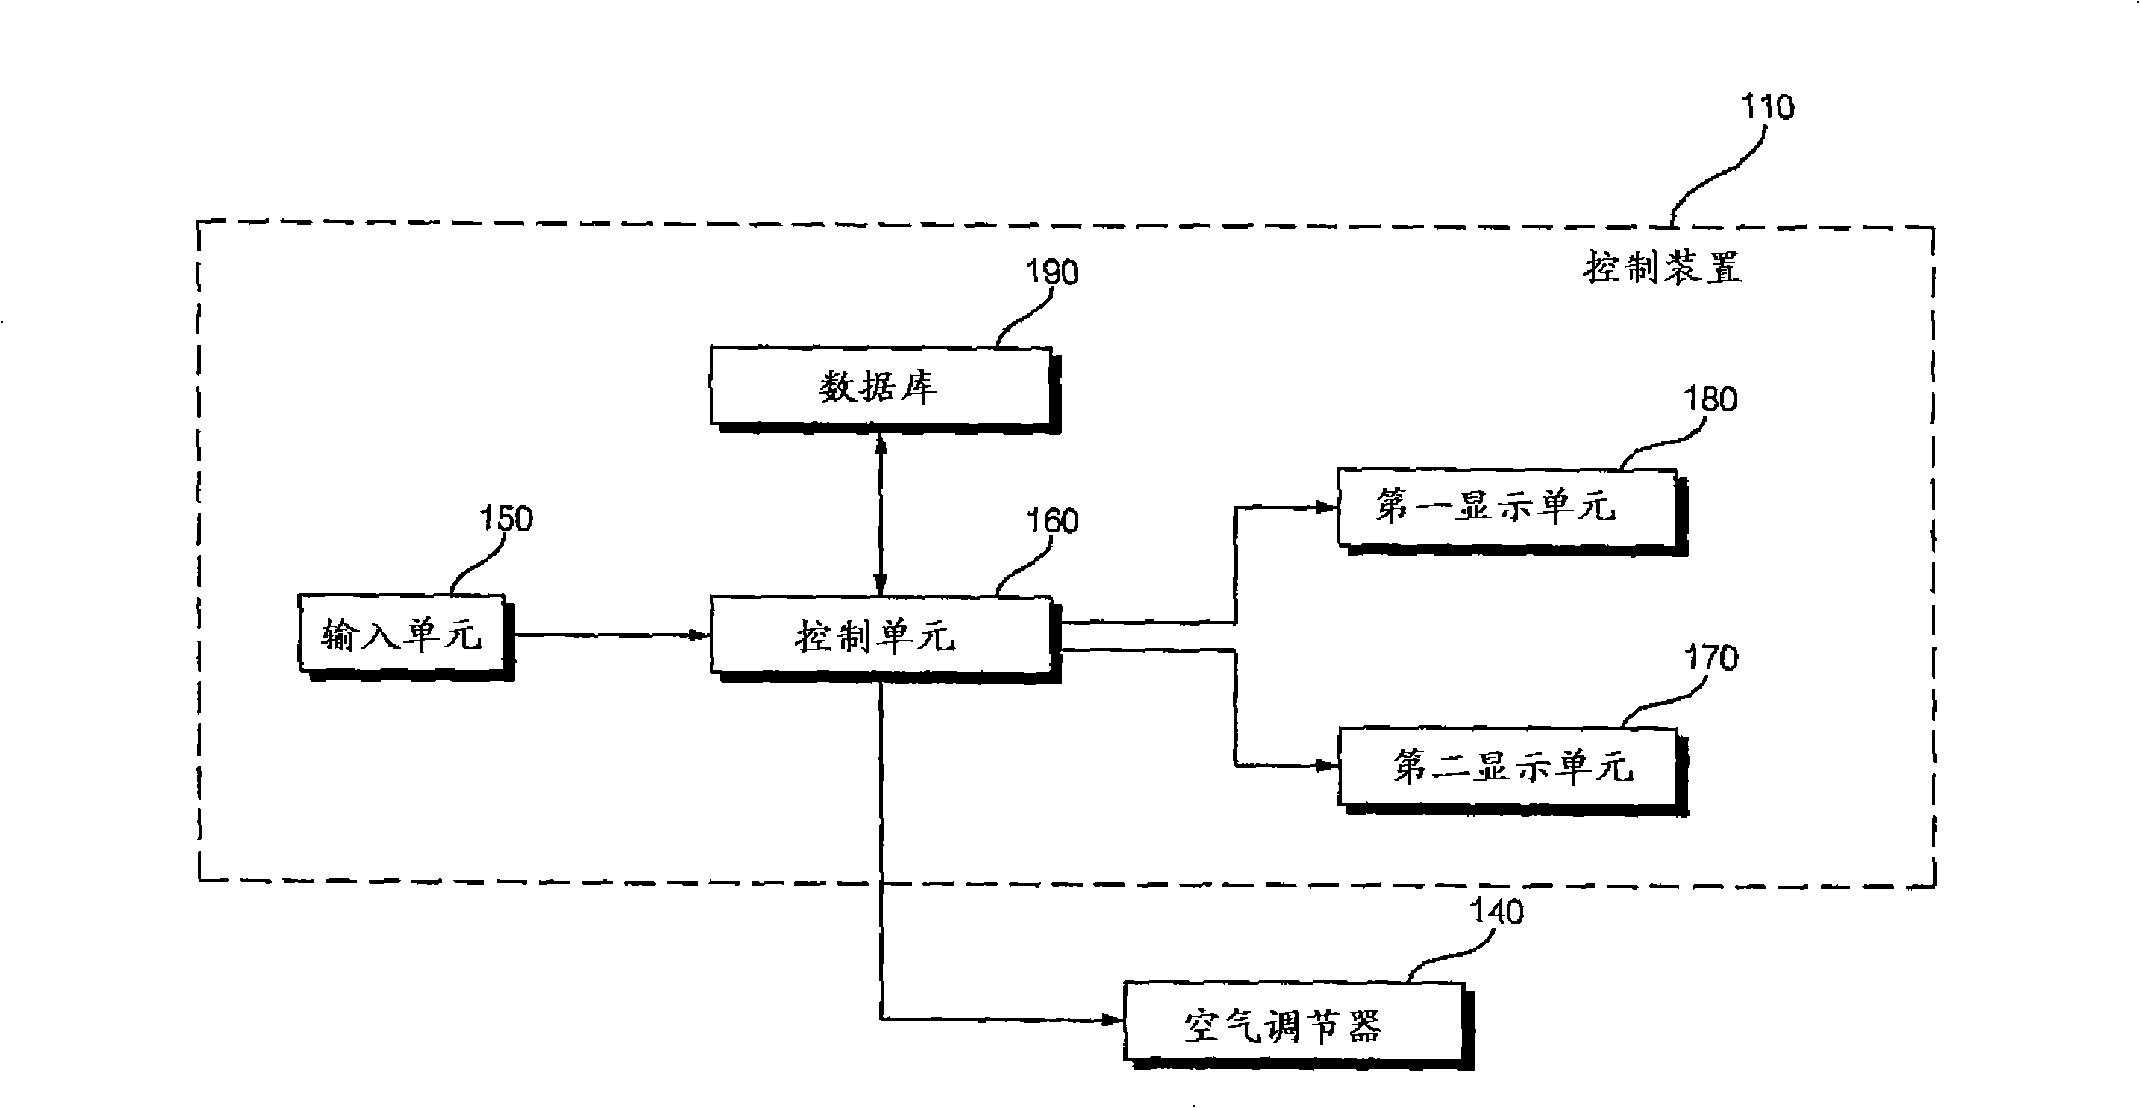 Control device for air conditioner